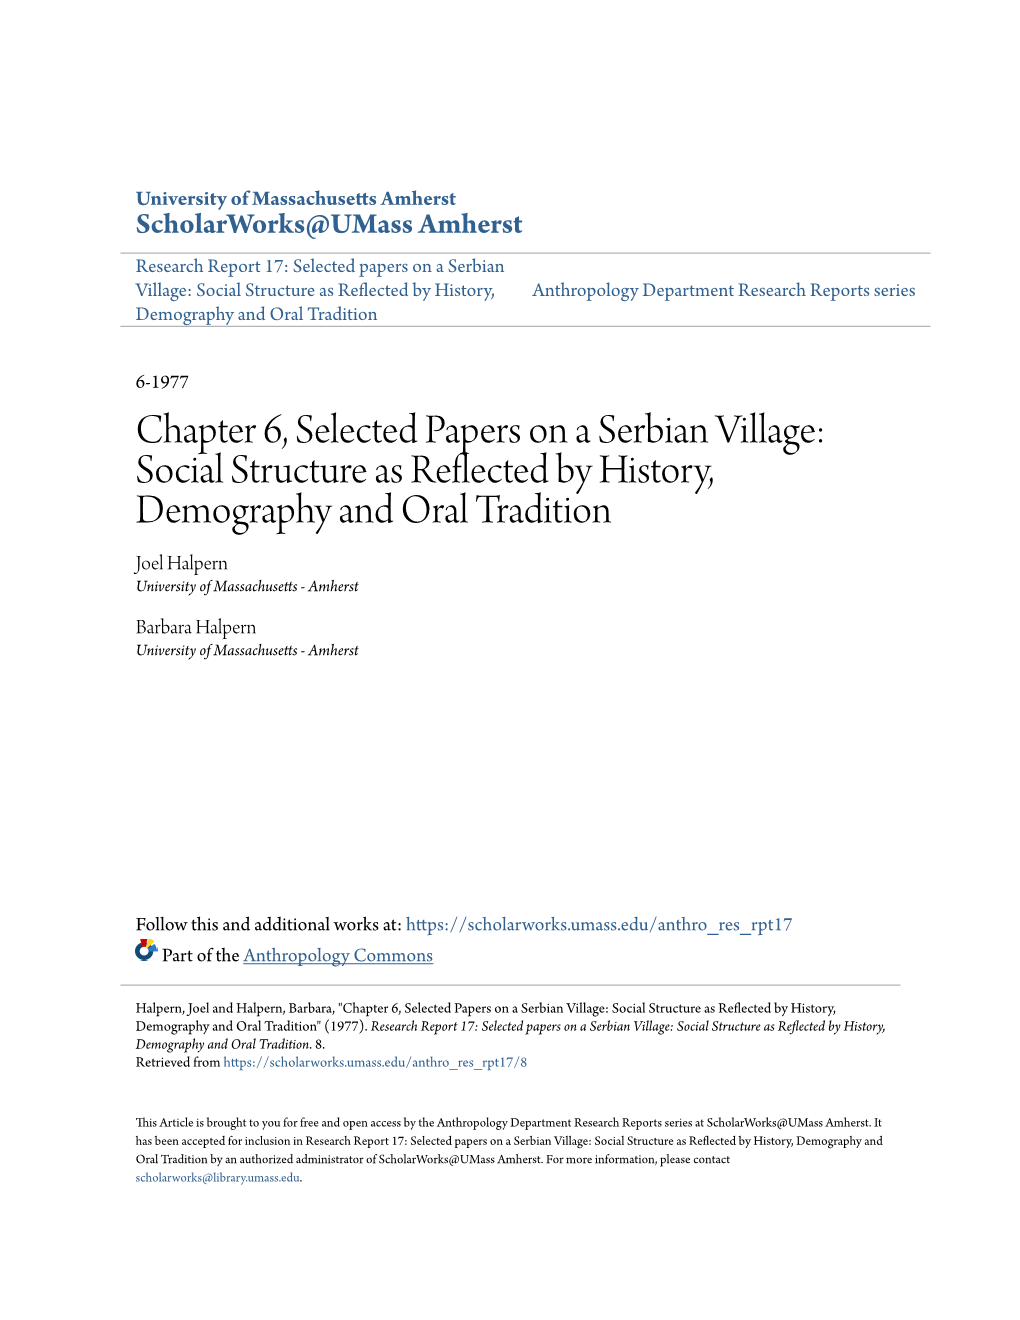 Chapter 6, Selected Papers on a Serbian Village: Social Structure As